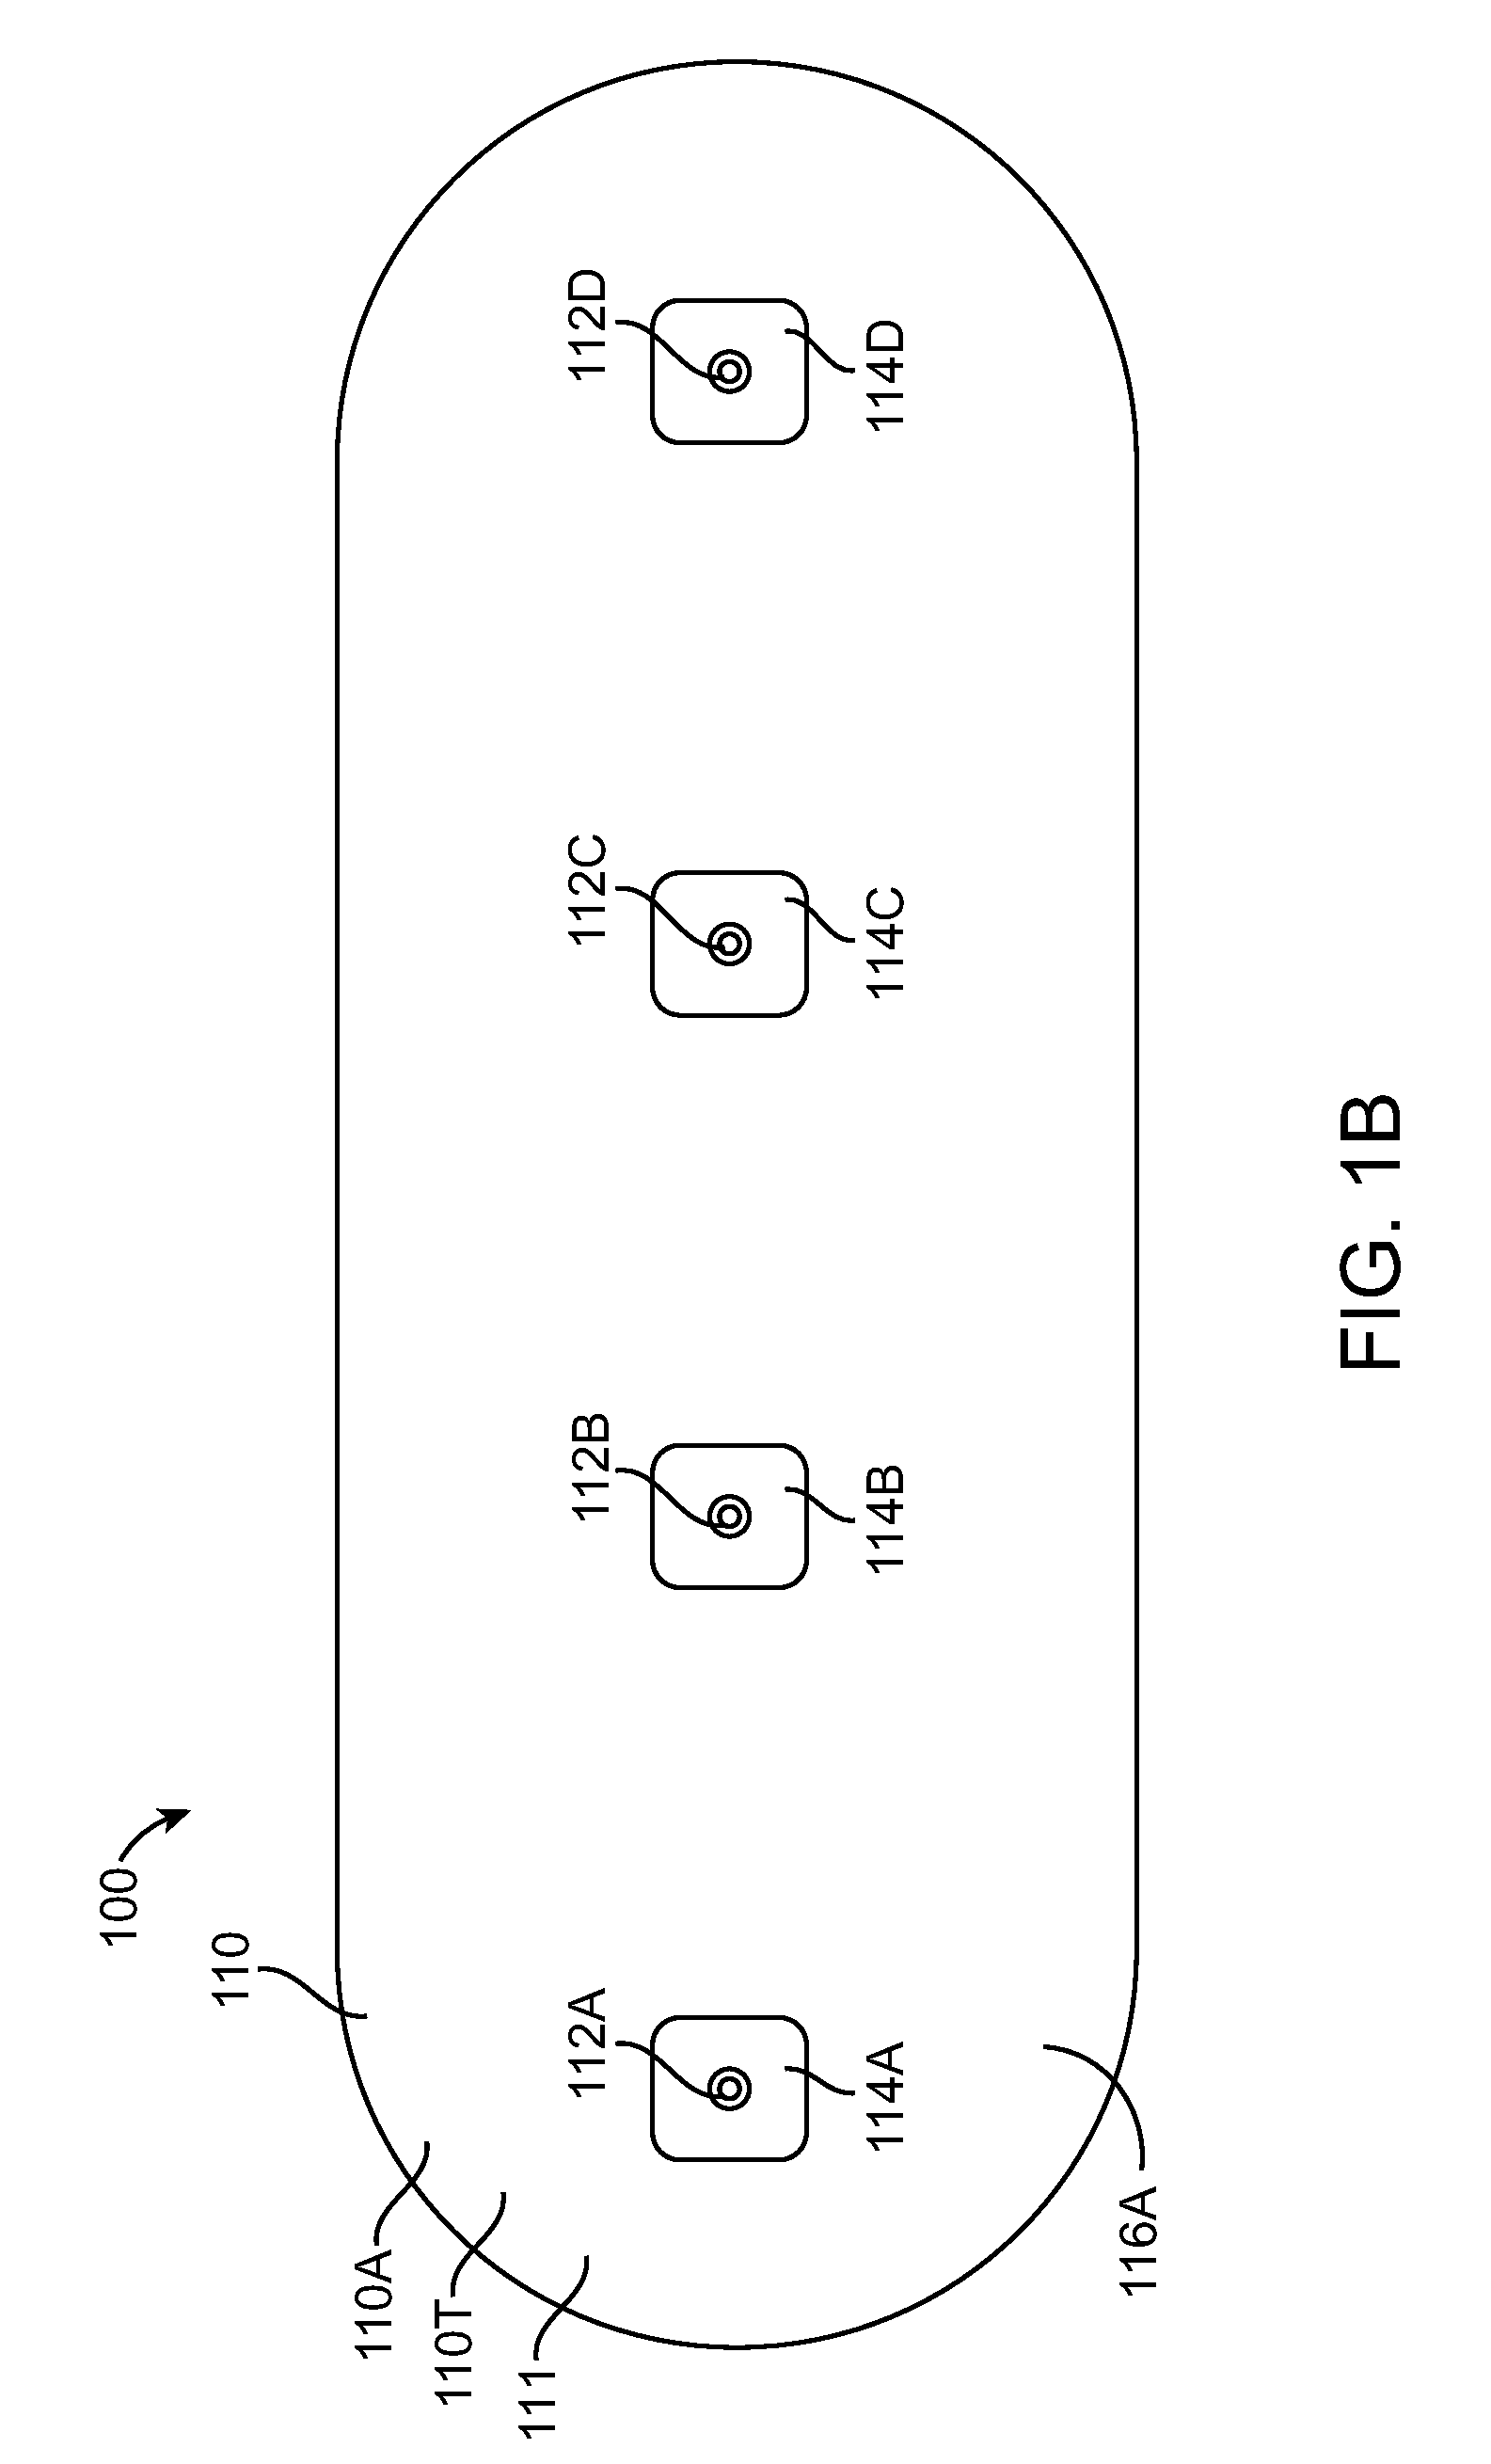 Method and apparatus to measure bioelectric impedance of patient tissue